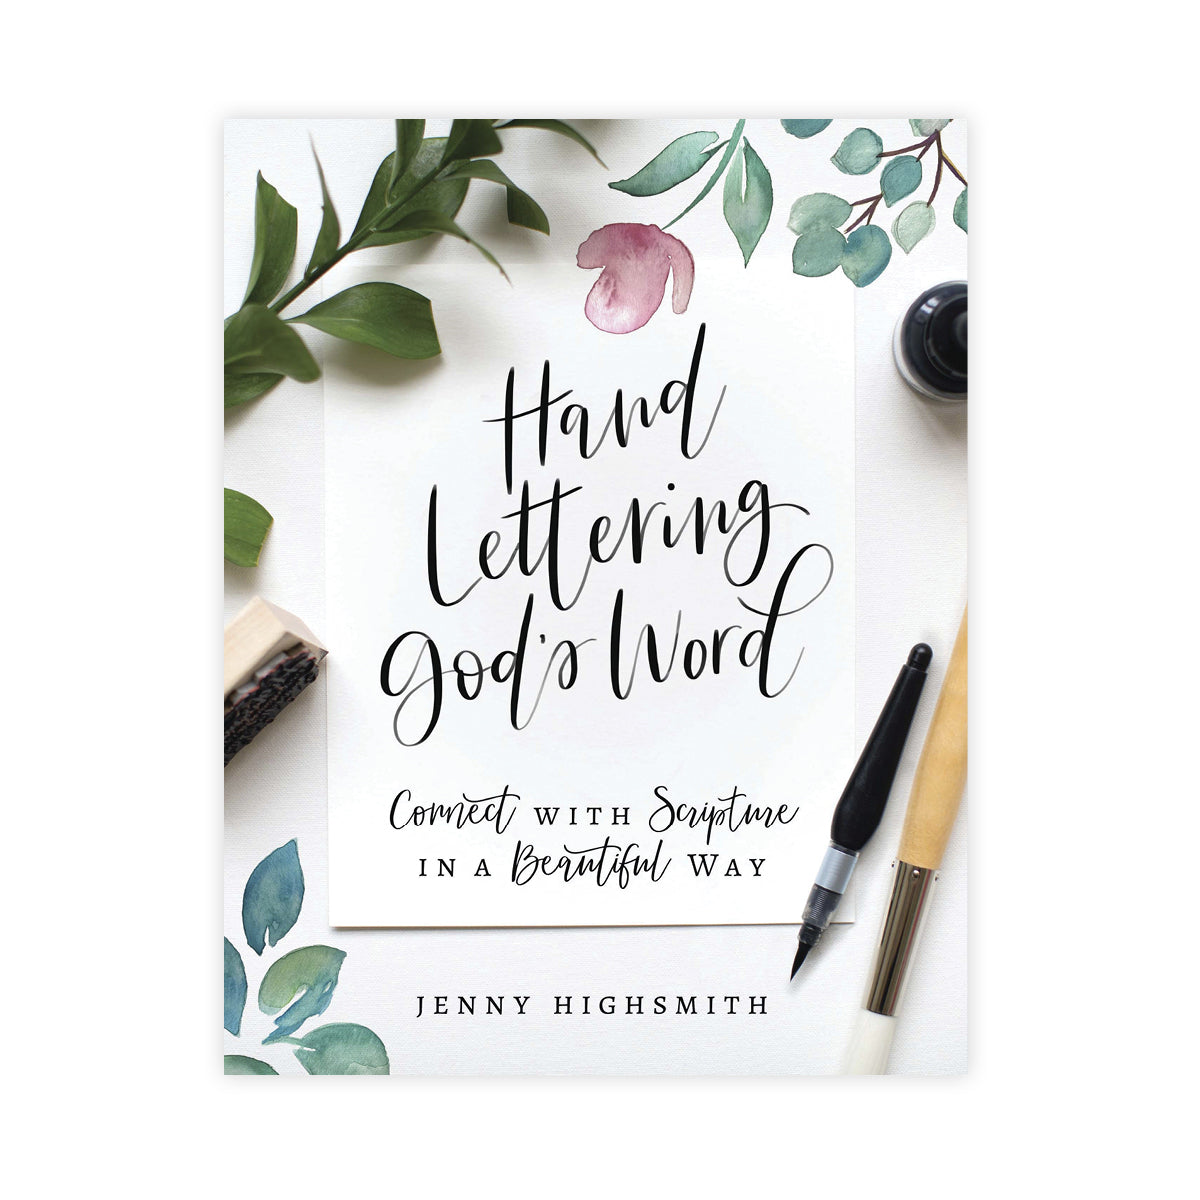 Hand Lettering God's Word Book